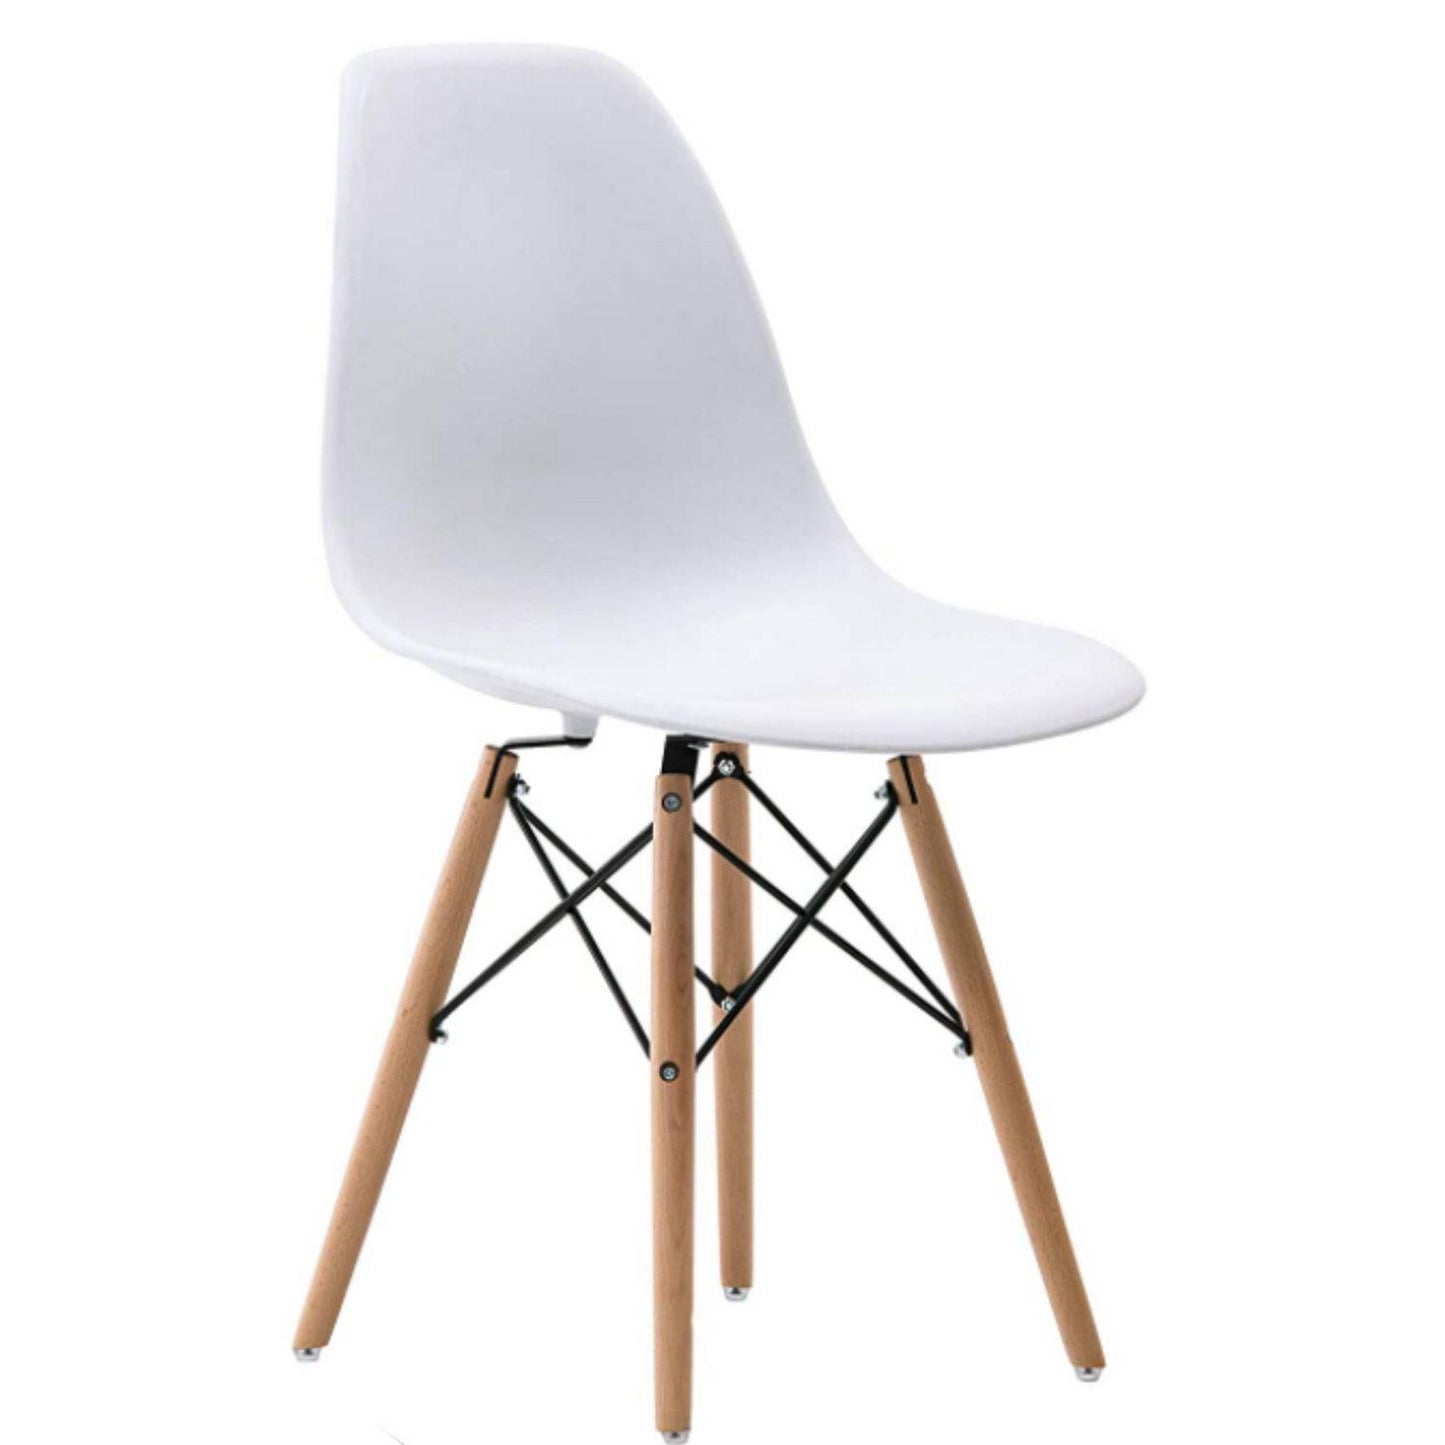 Pack 2 Sillas Eames (Kl)